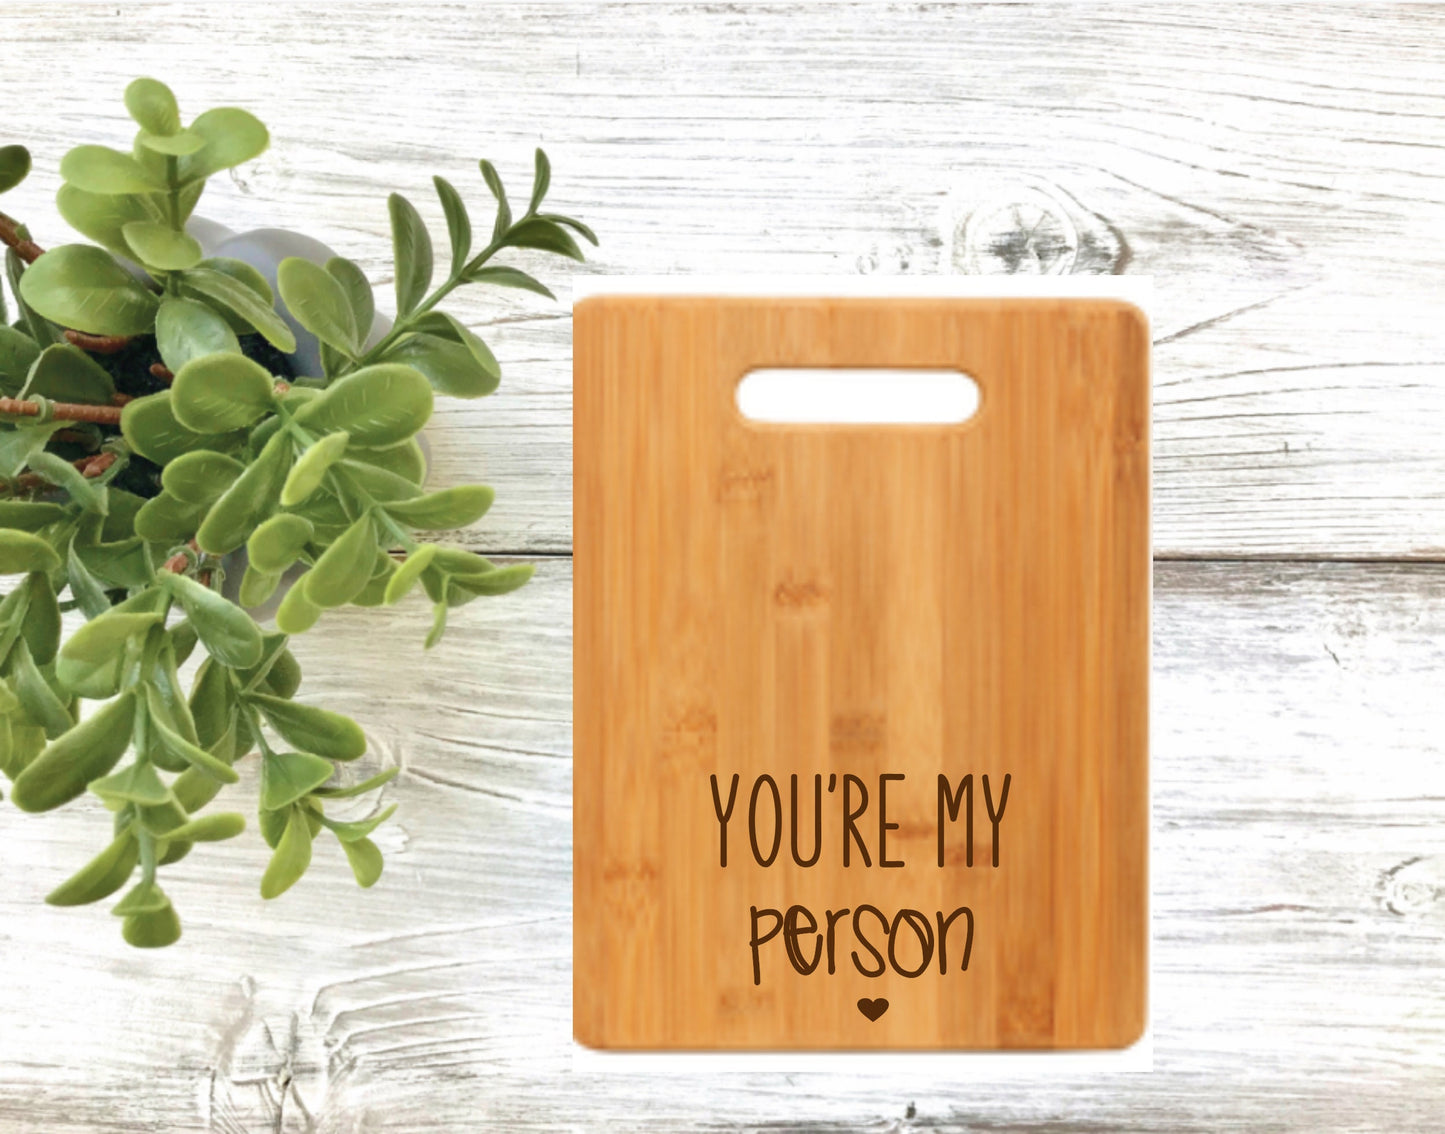 Best Friend Gift, Best Friend Cutting Board, Personalized gift for her, You're my person, Friendship, 9" x 6" Small Cutting Board